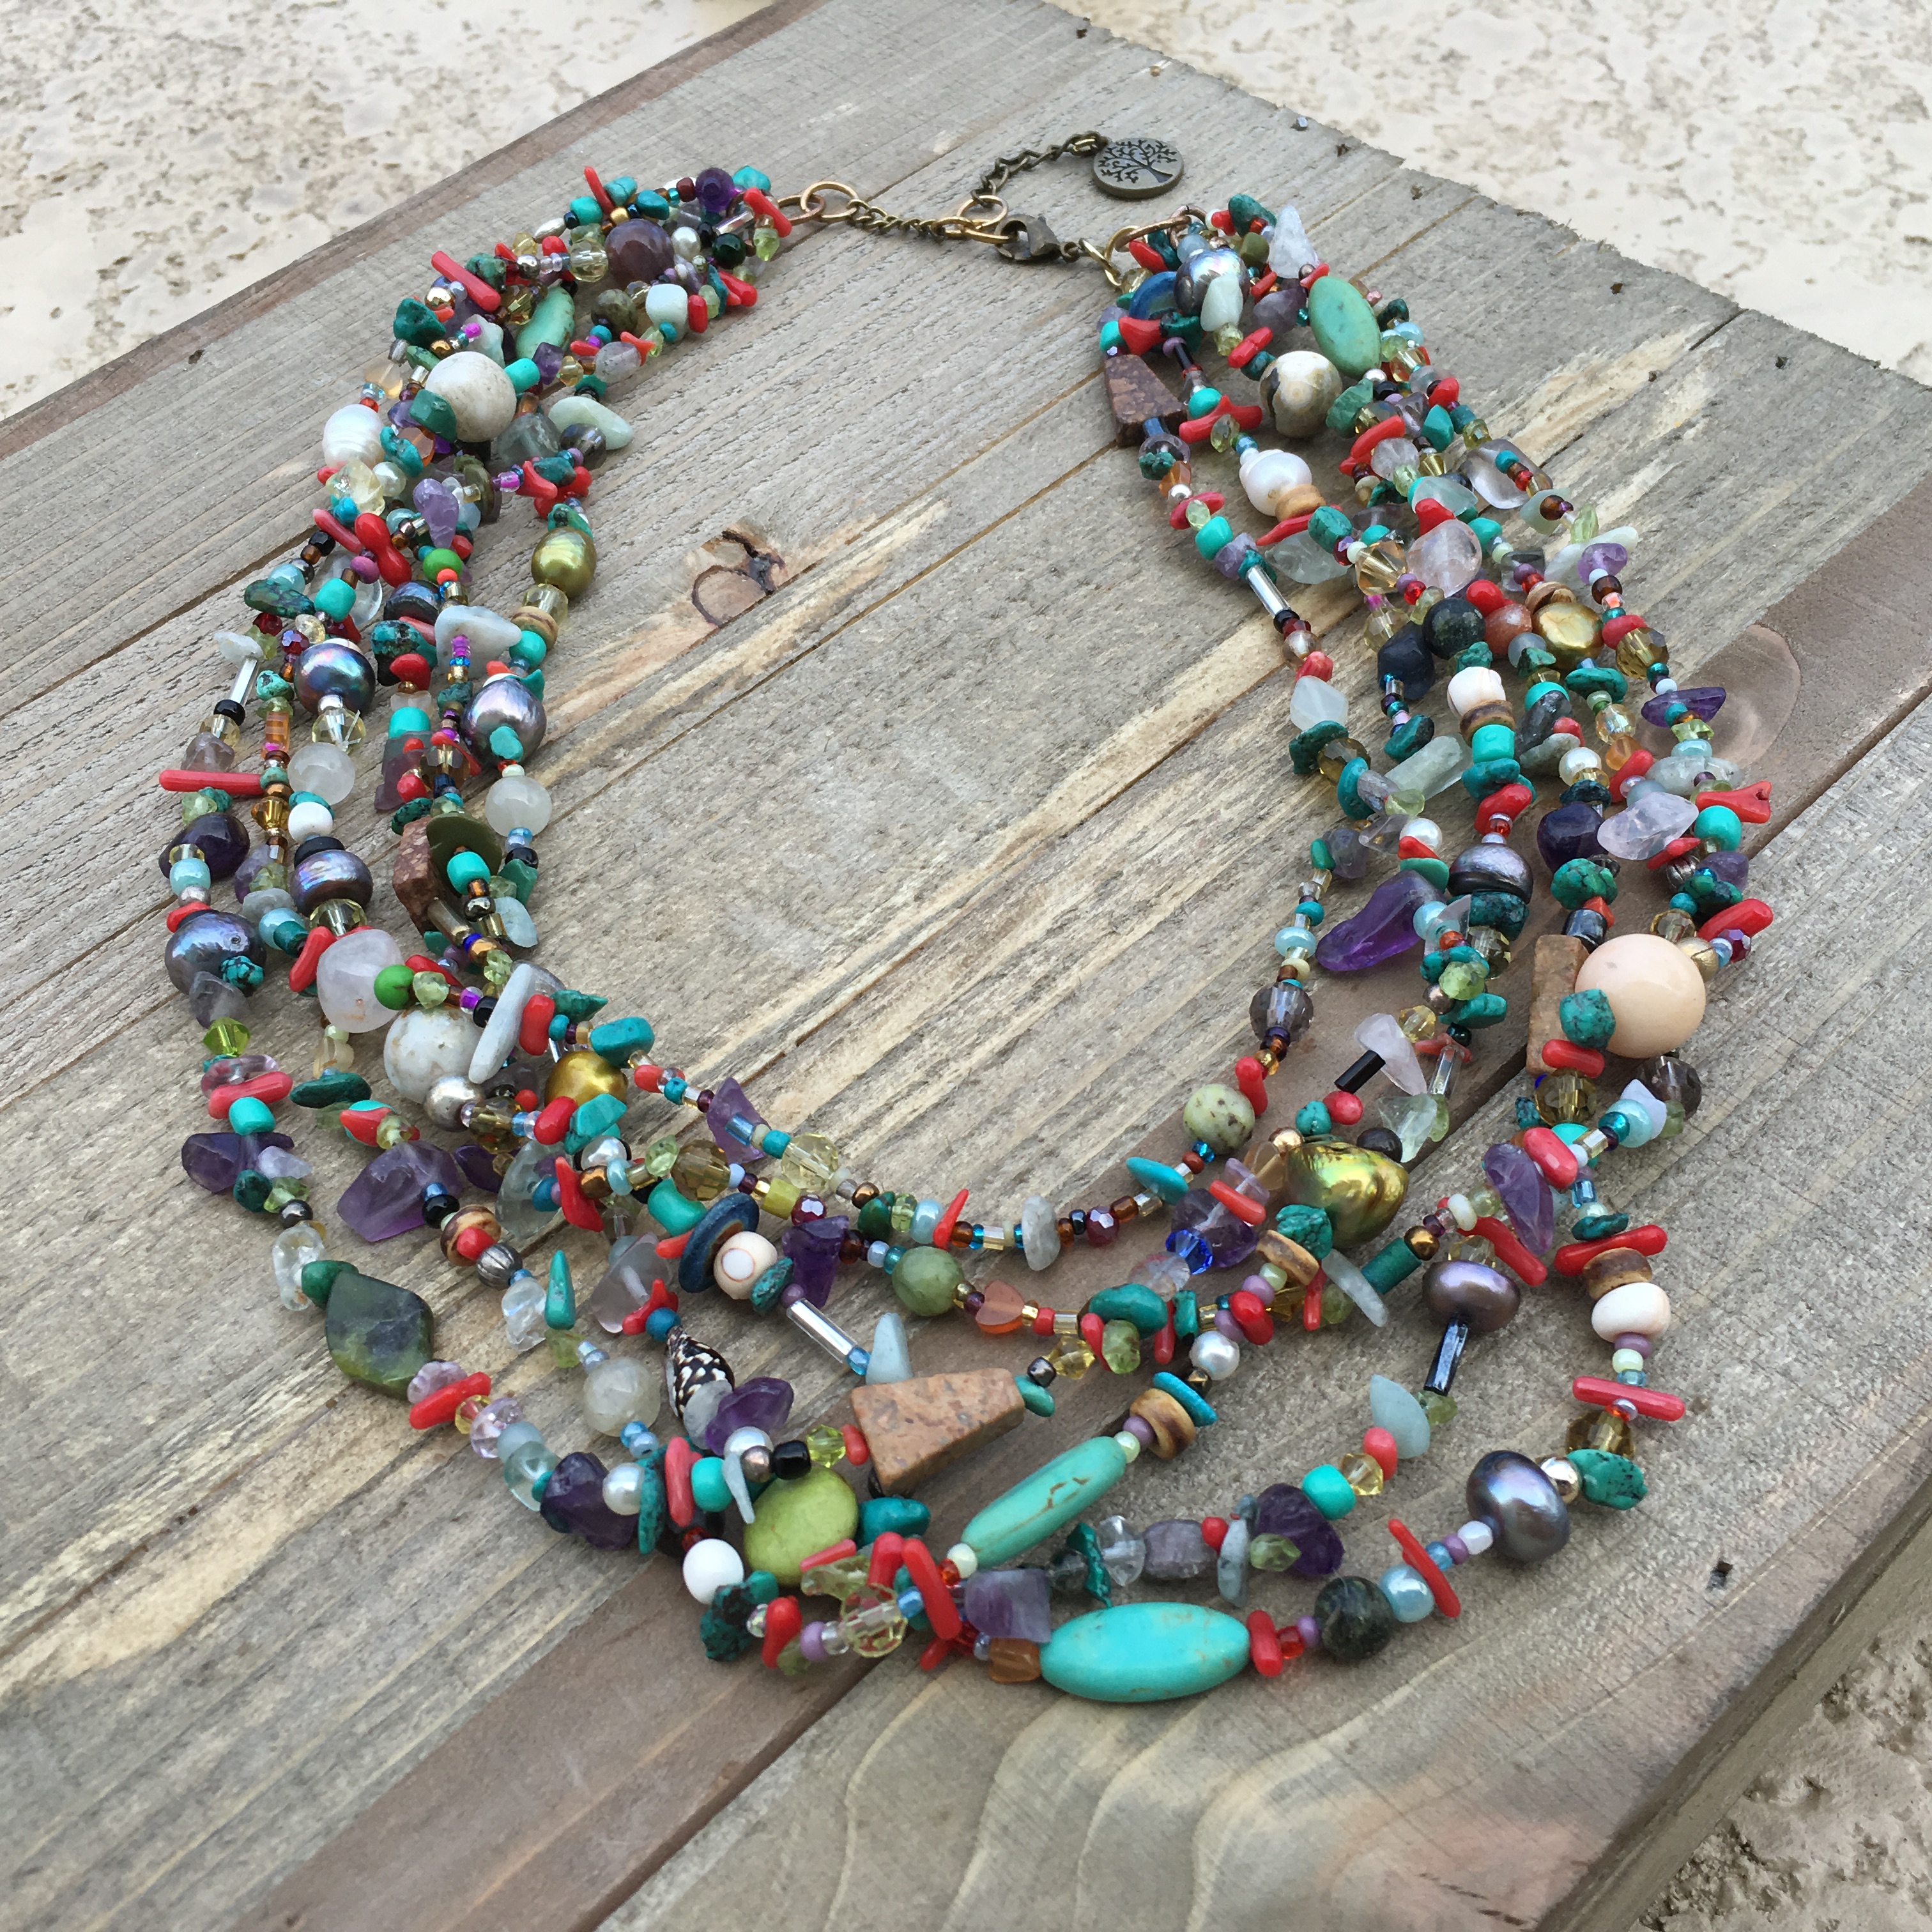 Six Strands of Semi-Precious Gems and Stone Necklace